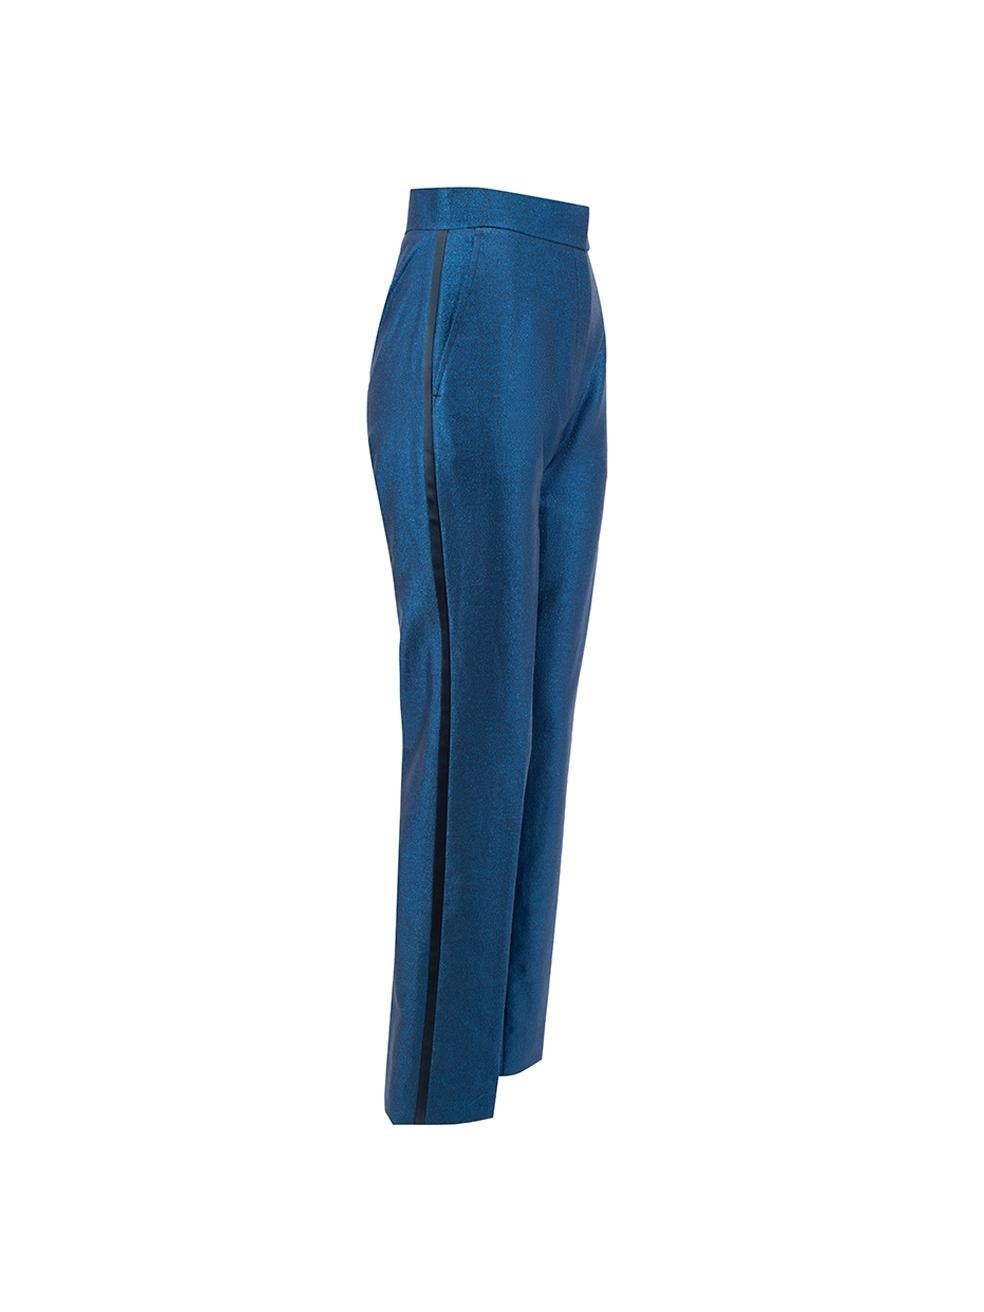 CONDITION is Never Worn. No visible wear to trousers is evident on this used Sanne designer sample item. 
 
 Details
  Designer sample item
 Metallic blue
 Synthetic
 Straight leg trousers
 Side black stripe accent
 High rise
 Front zip closure with